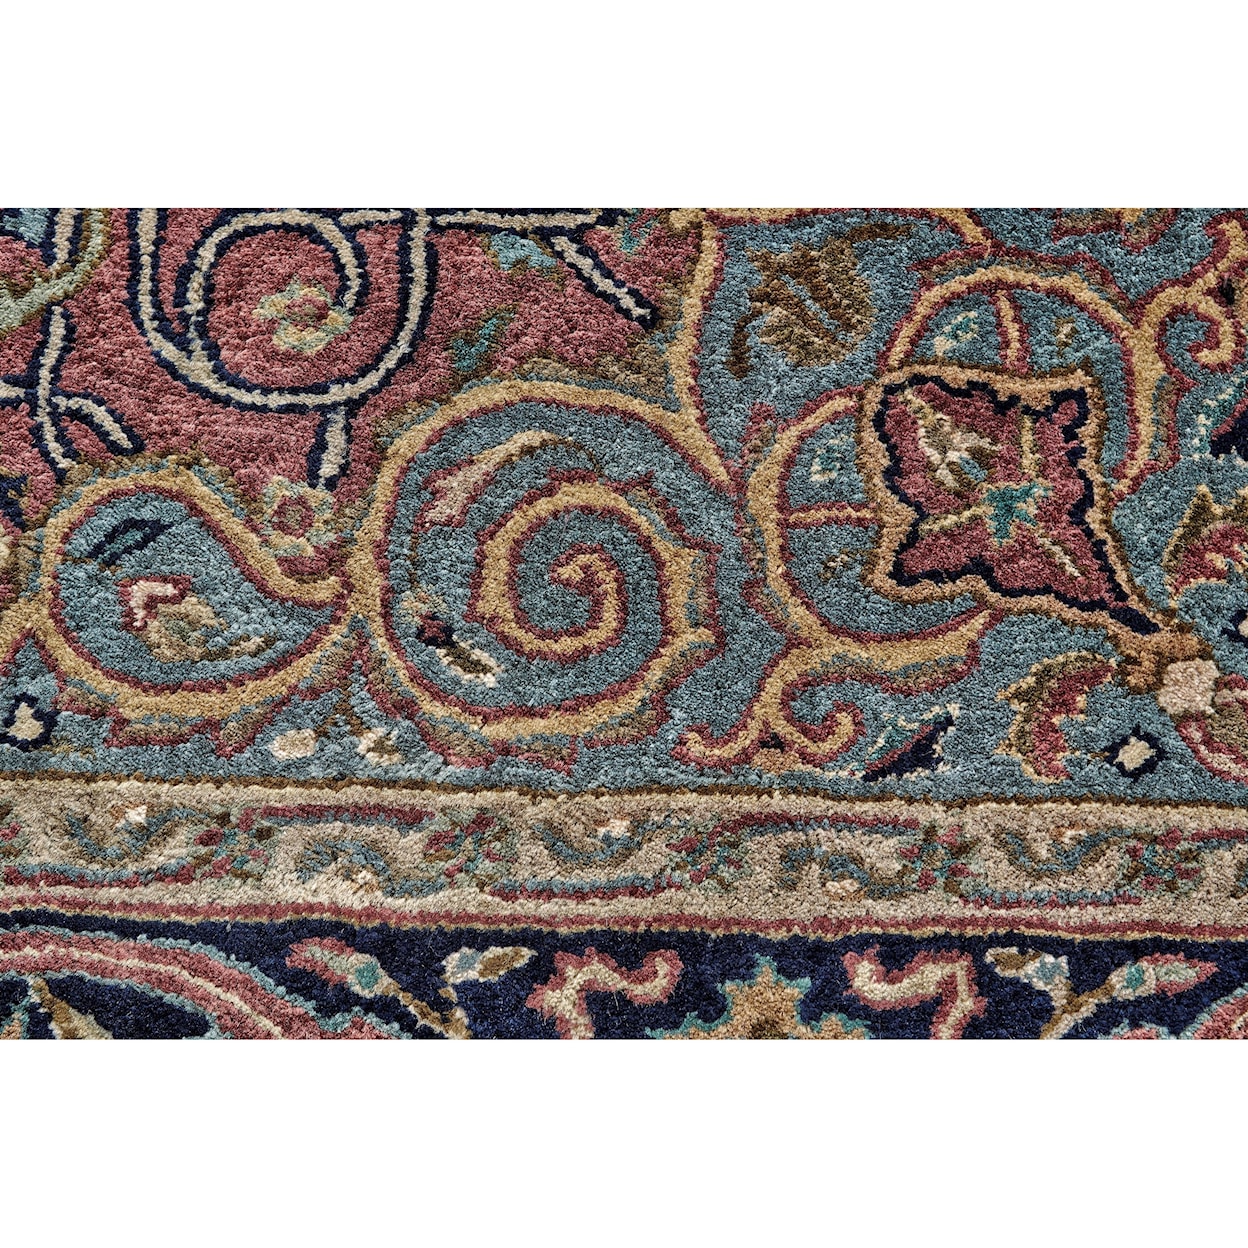 Feizy Rugs Amore Plum 2' x 3' Area Rug